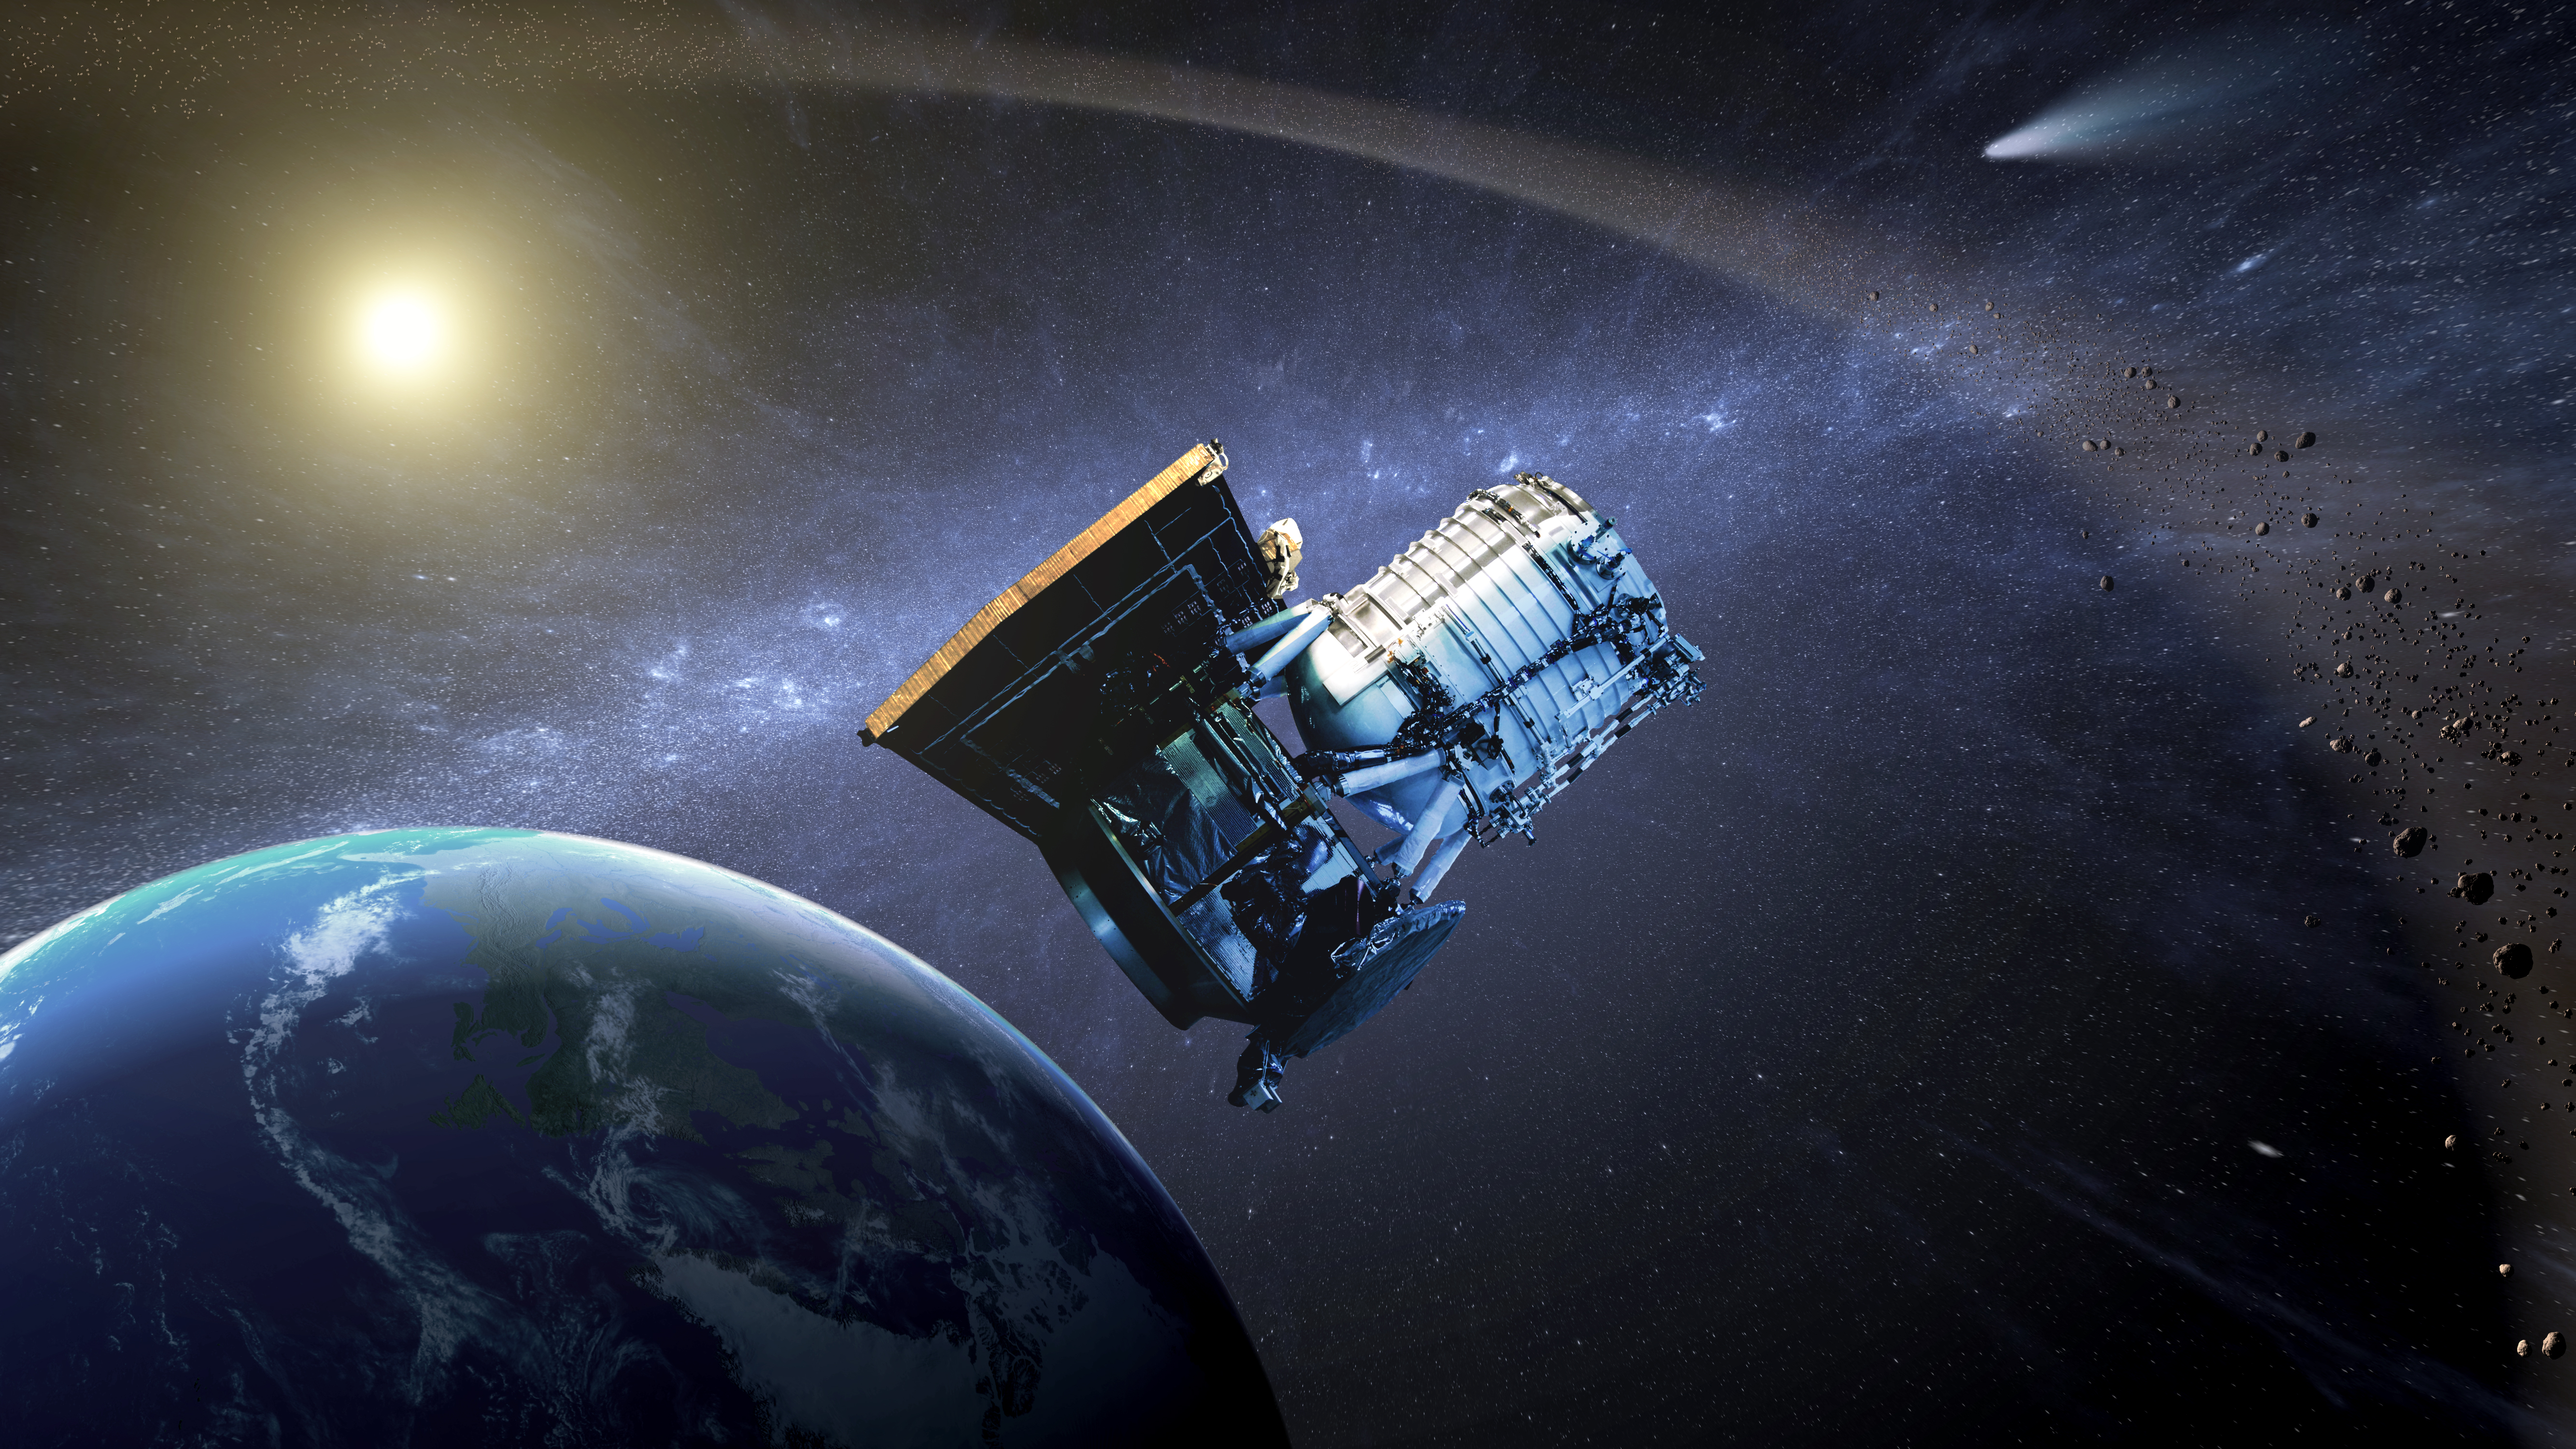 Artist’s concept of NASA's WISE (Wide-field Infrared Survey Explorer) spacecraft, which was an infrared-wavelength astronomical space telescope active from December 2009 to February 2011. In September 2013 the spacecraft was assigned a new mission as NEOWISE to help find near-Earth asteroids and comets. 